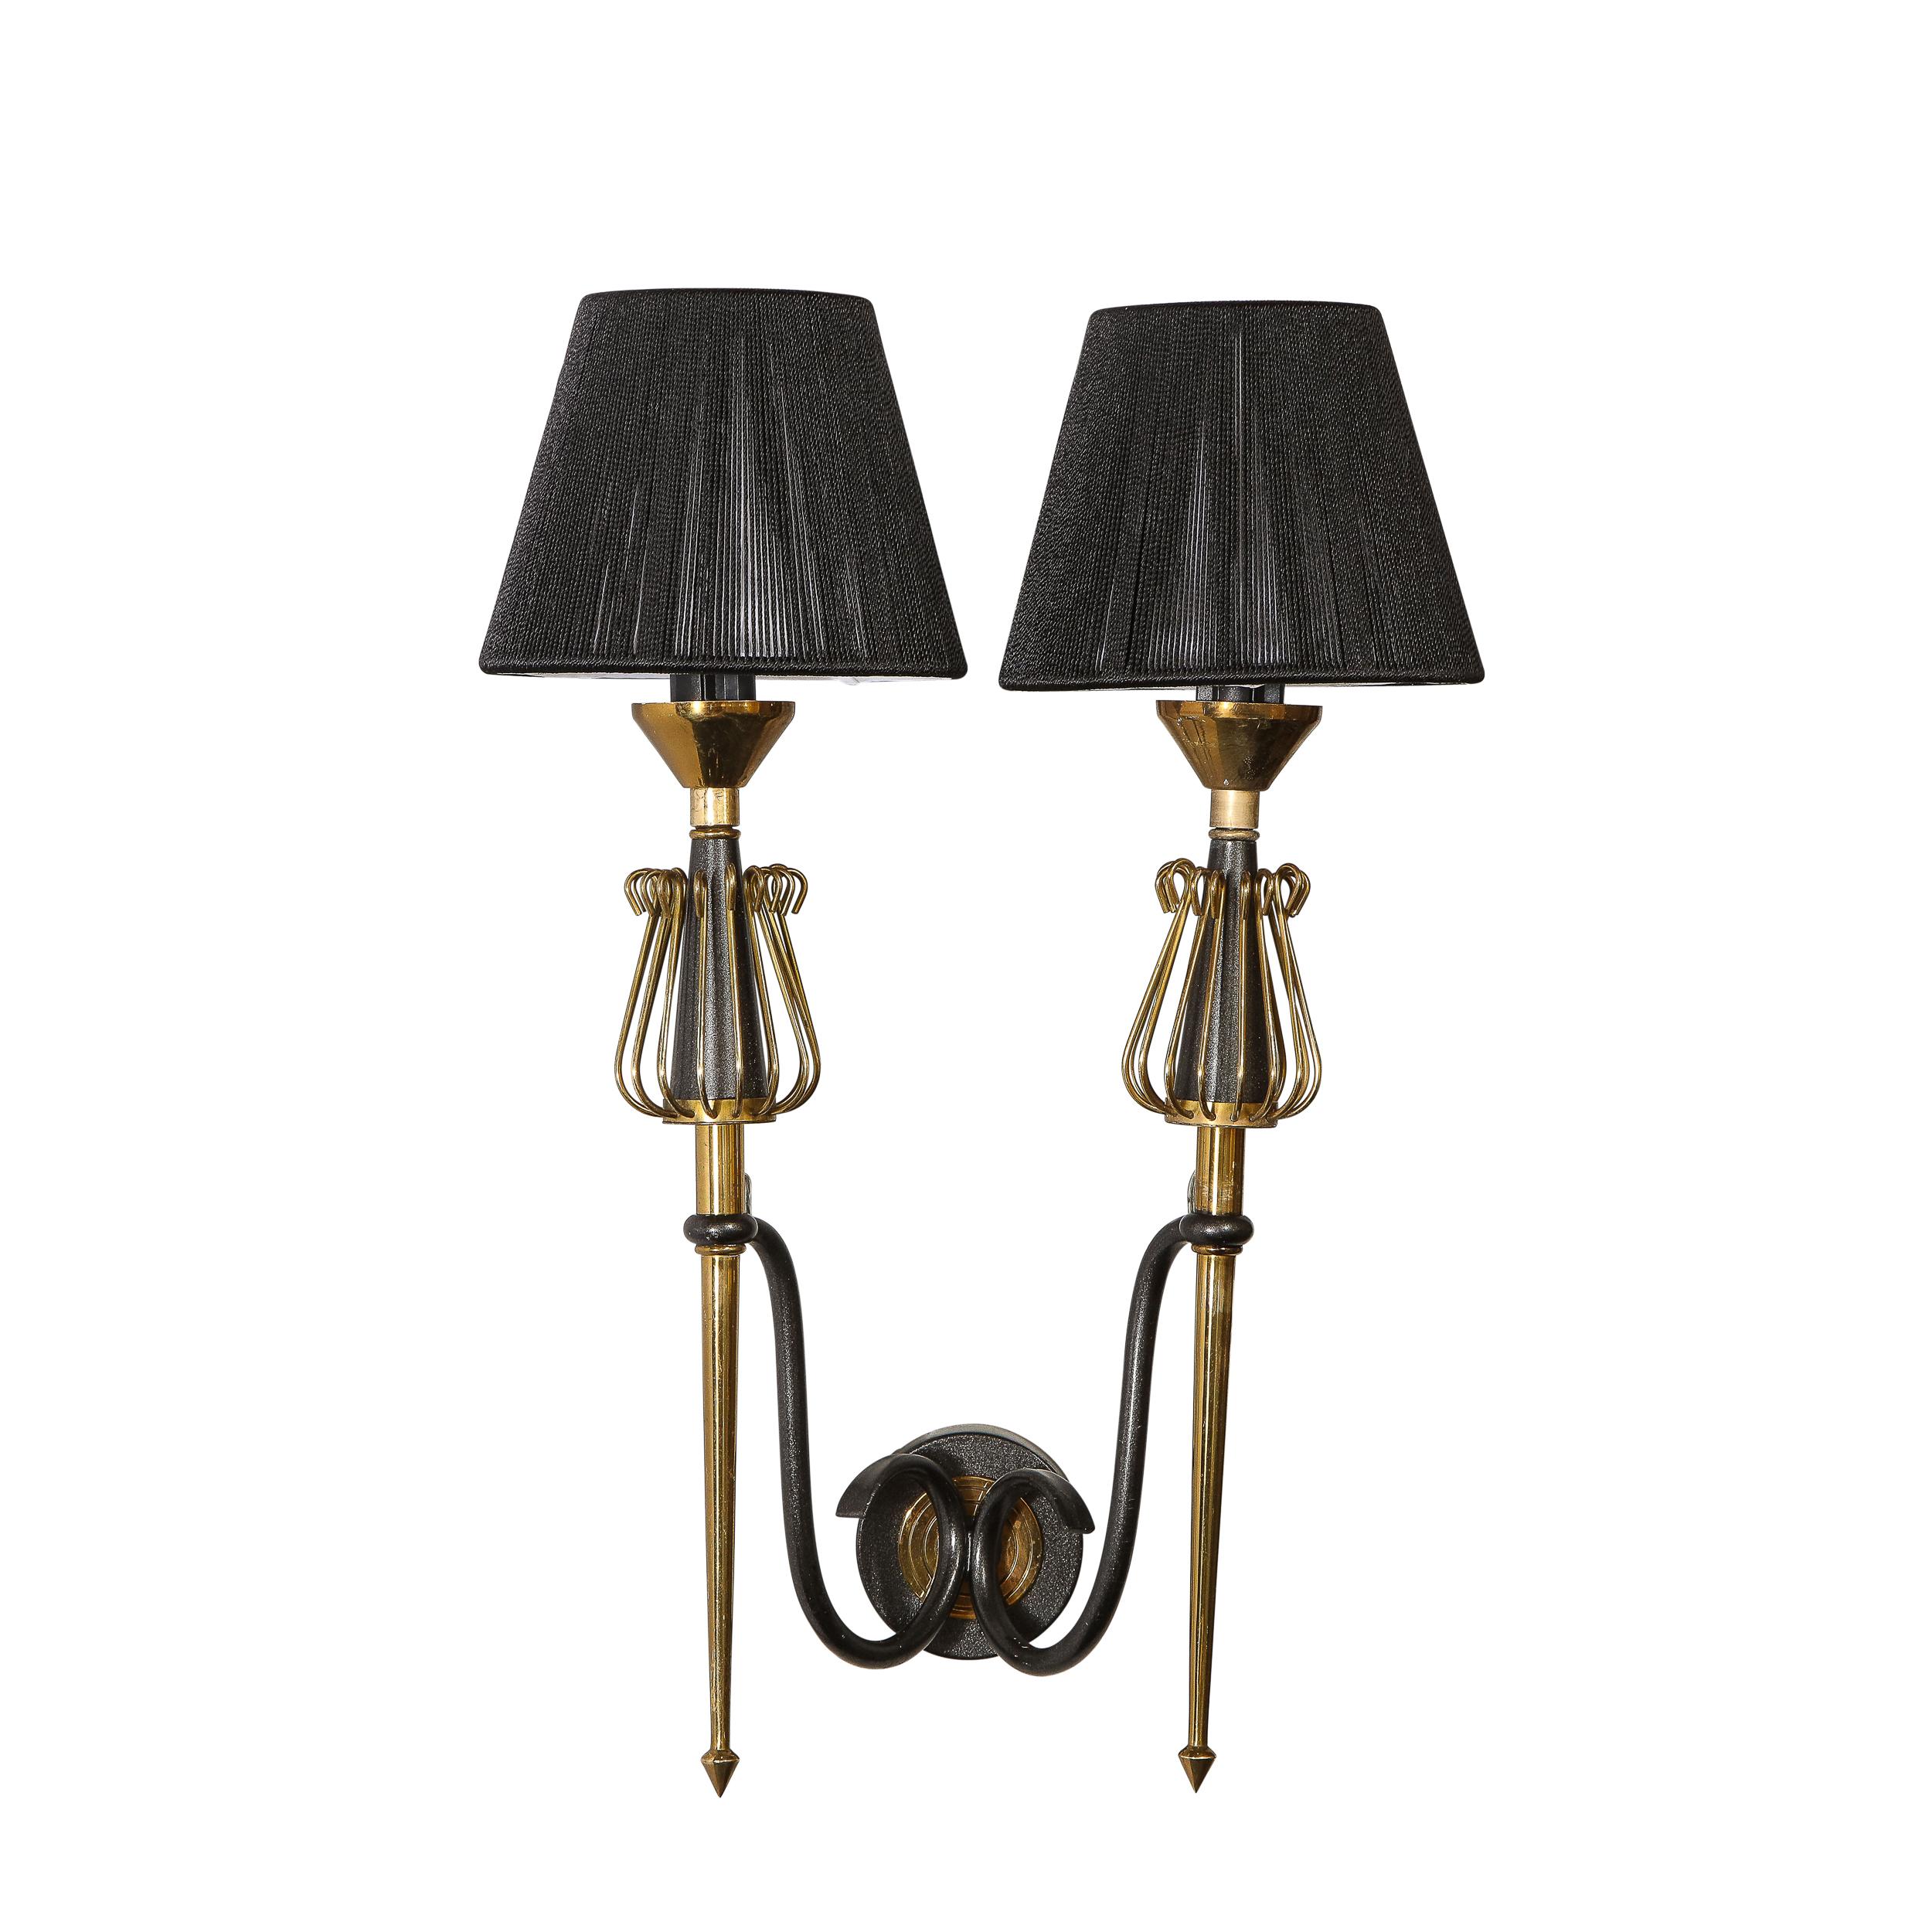 This elegant pair of Mid-Century Modern sconces were realized in France circa 1950. They feature a circular back plate with curvilinear supports in black enamel emanating outwards that hold the tapered brass bodies of the sconces punctuated at their